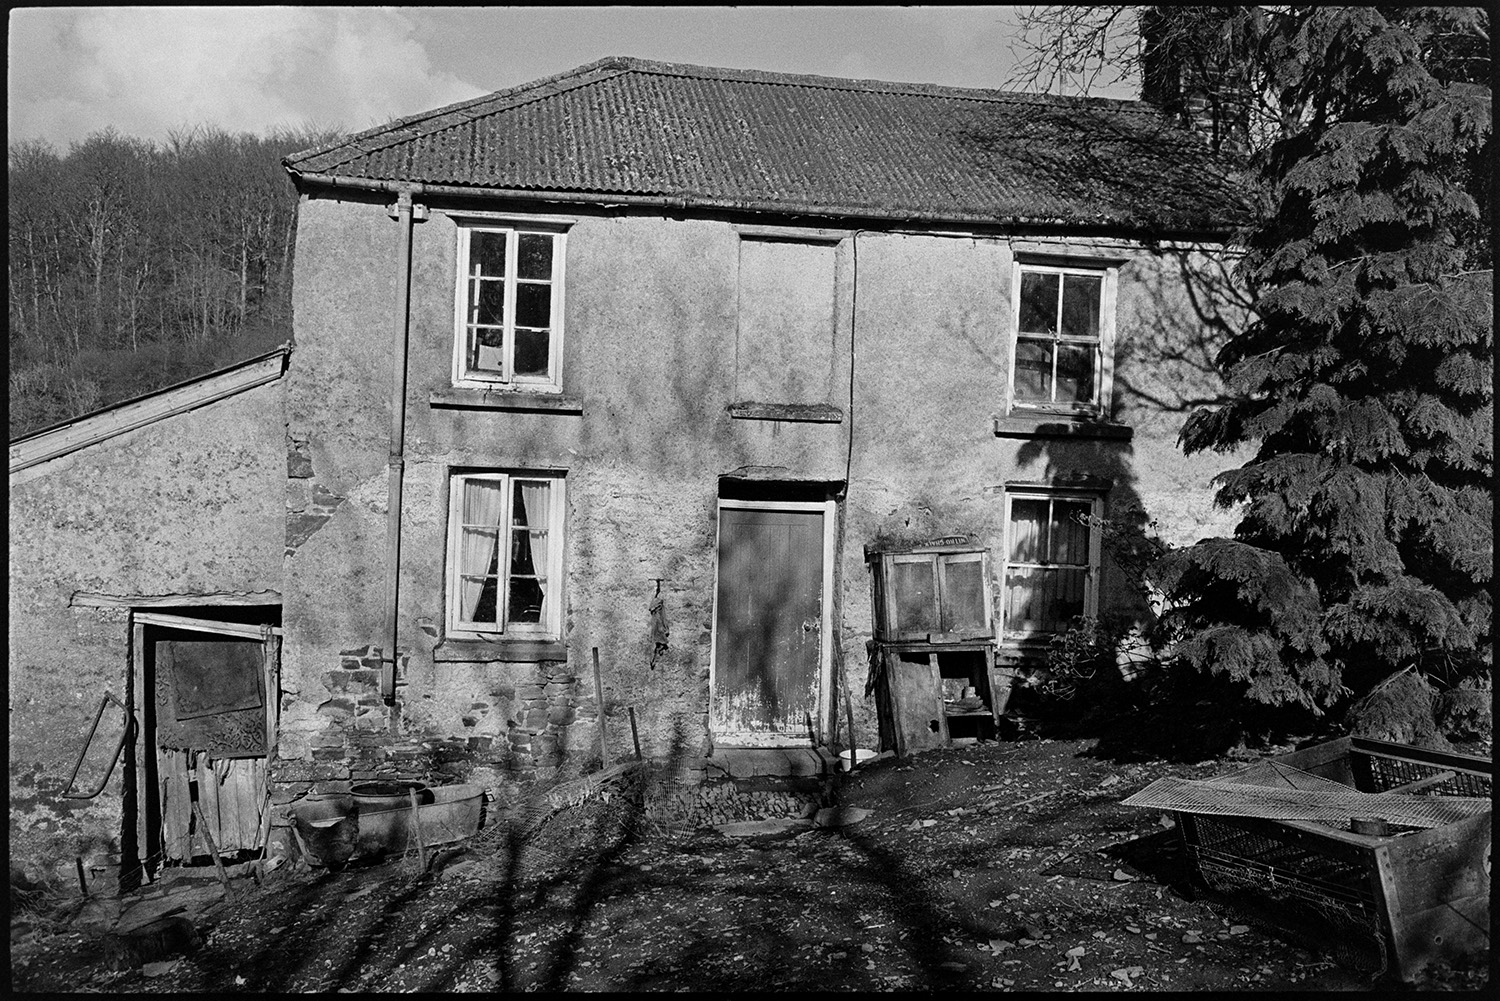 House in valley, now renovated. 
[Ivor Brock's house in a valley surrounded by trees at Millhams, Dolton.  An old tin bath and an animal run can be seen in the front yard. The house was later refurbished.]